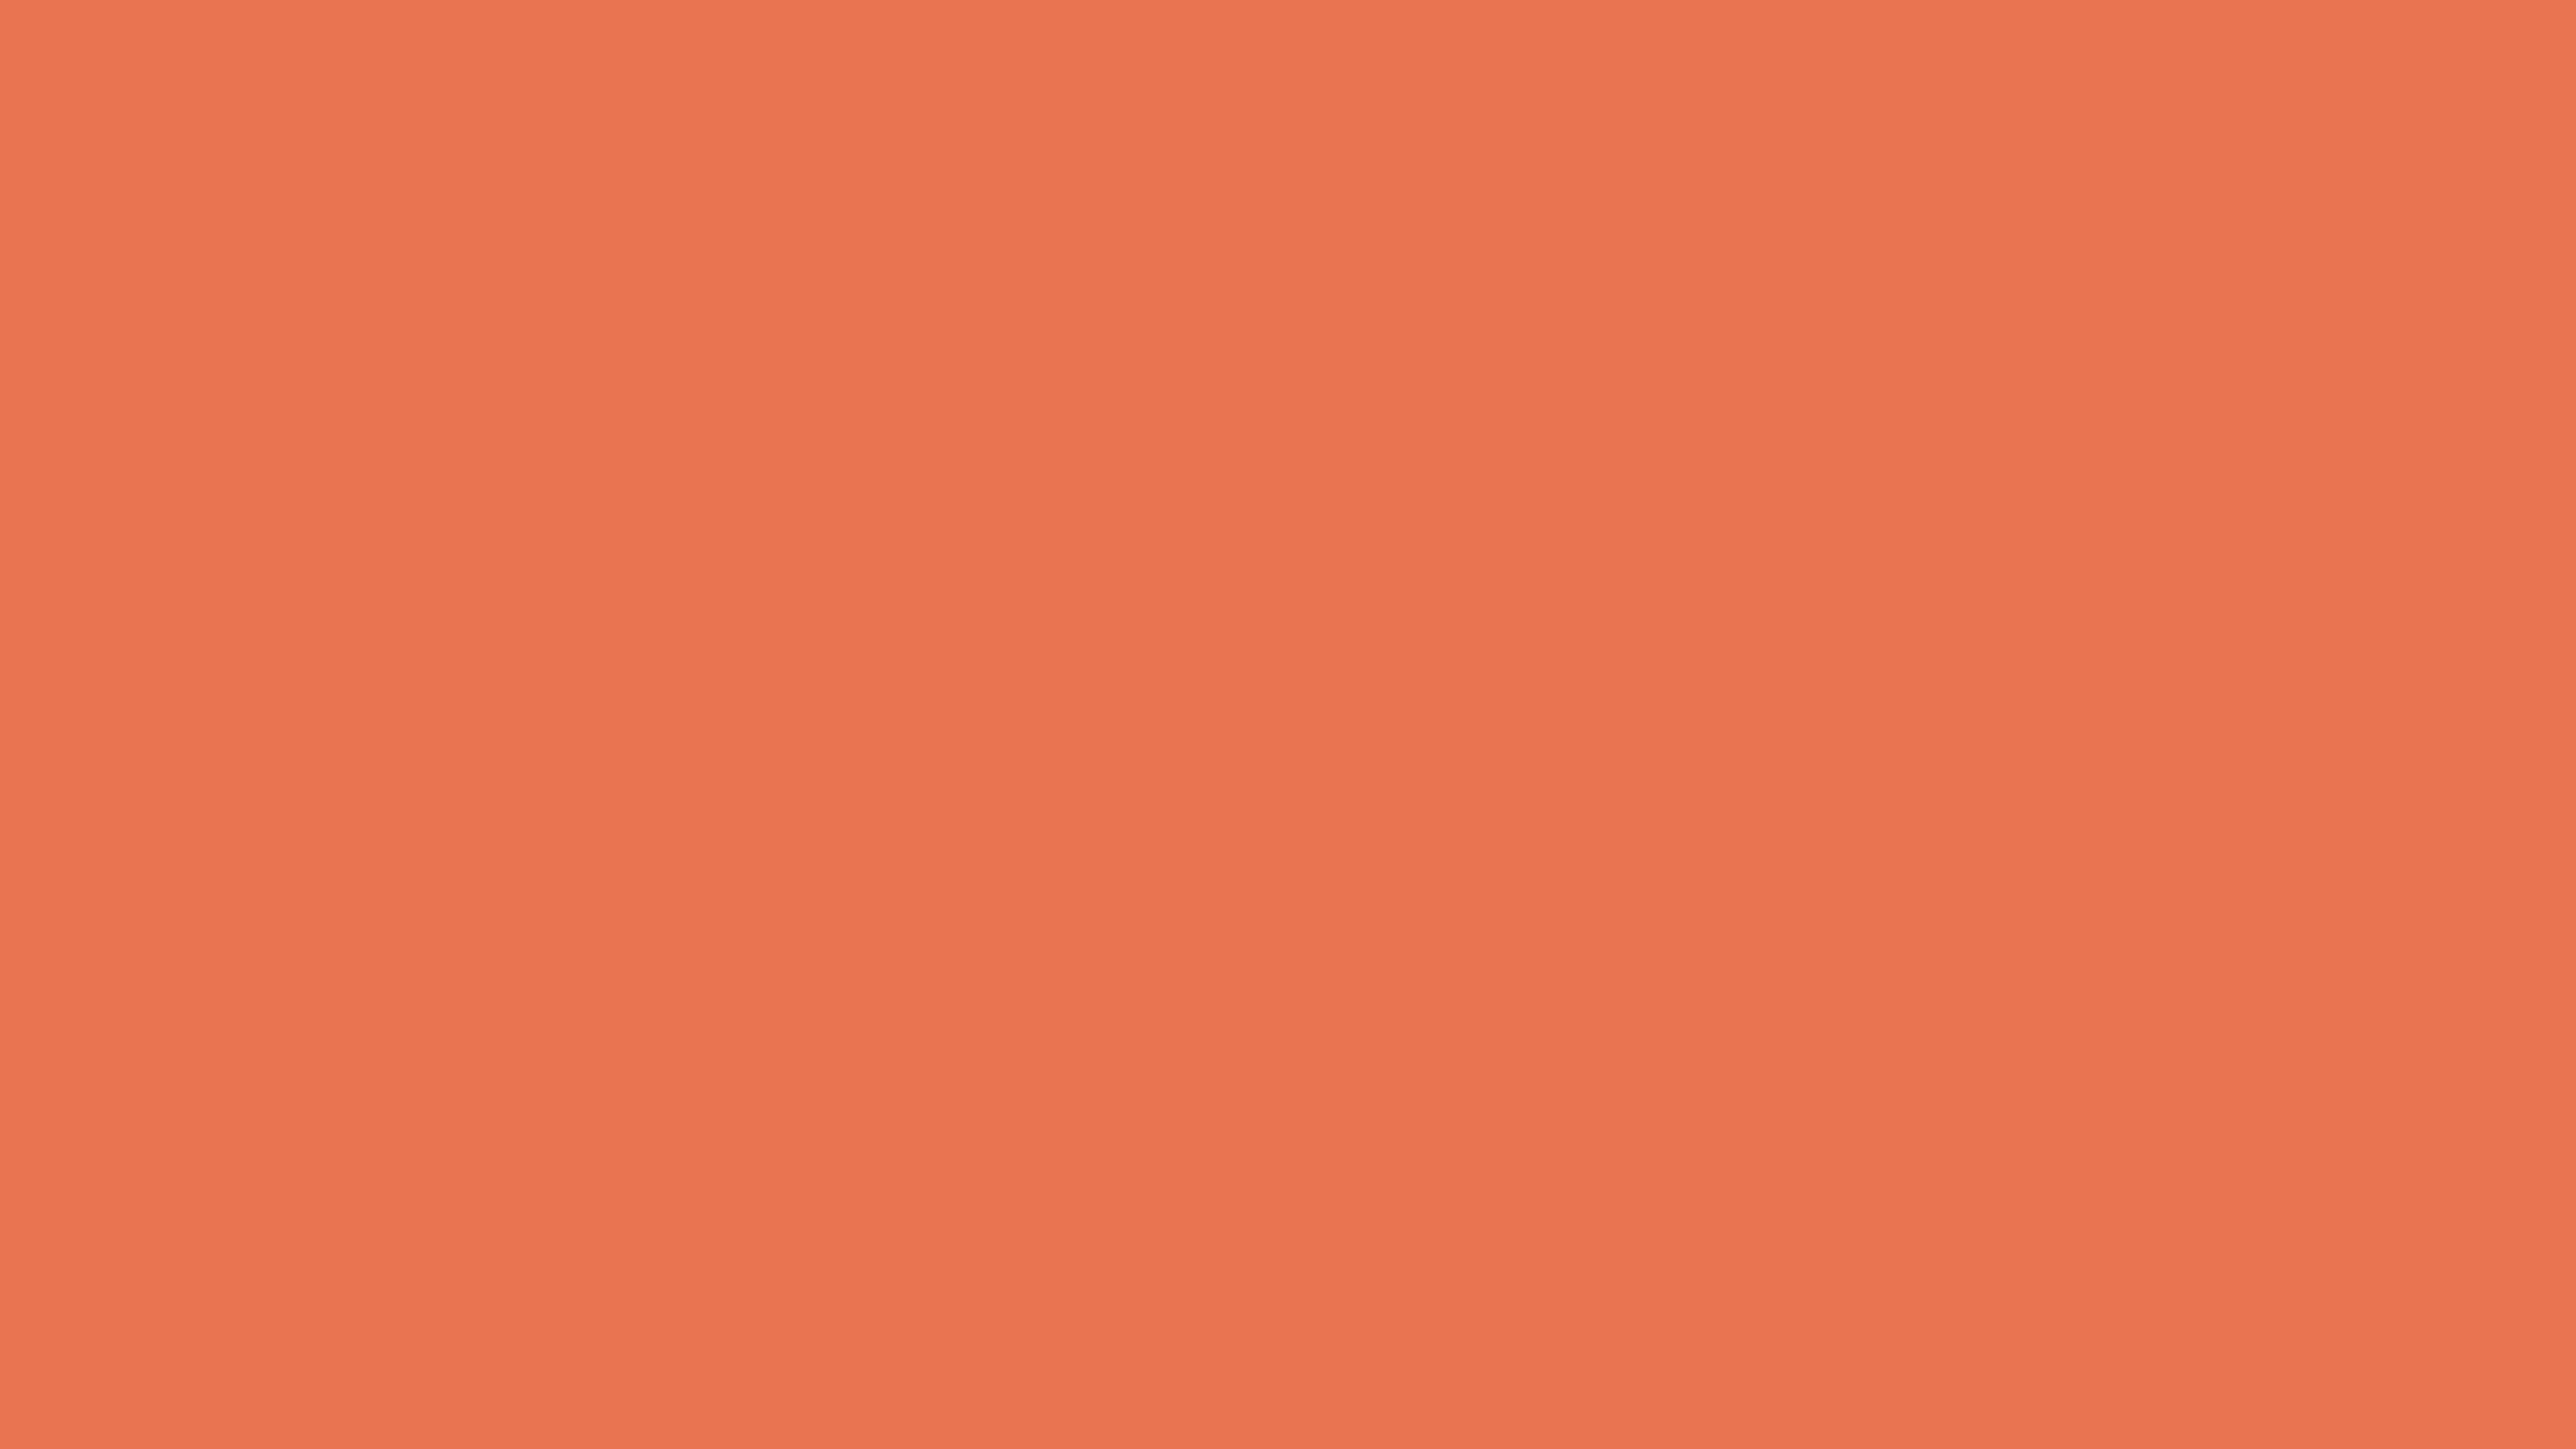 7680x4320 Light Red Ochre Solid Color Background